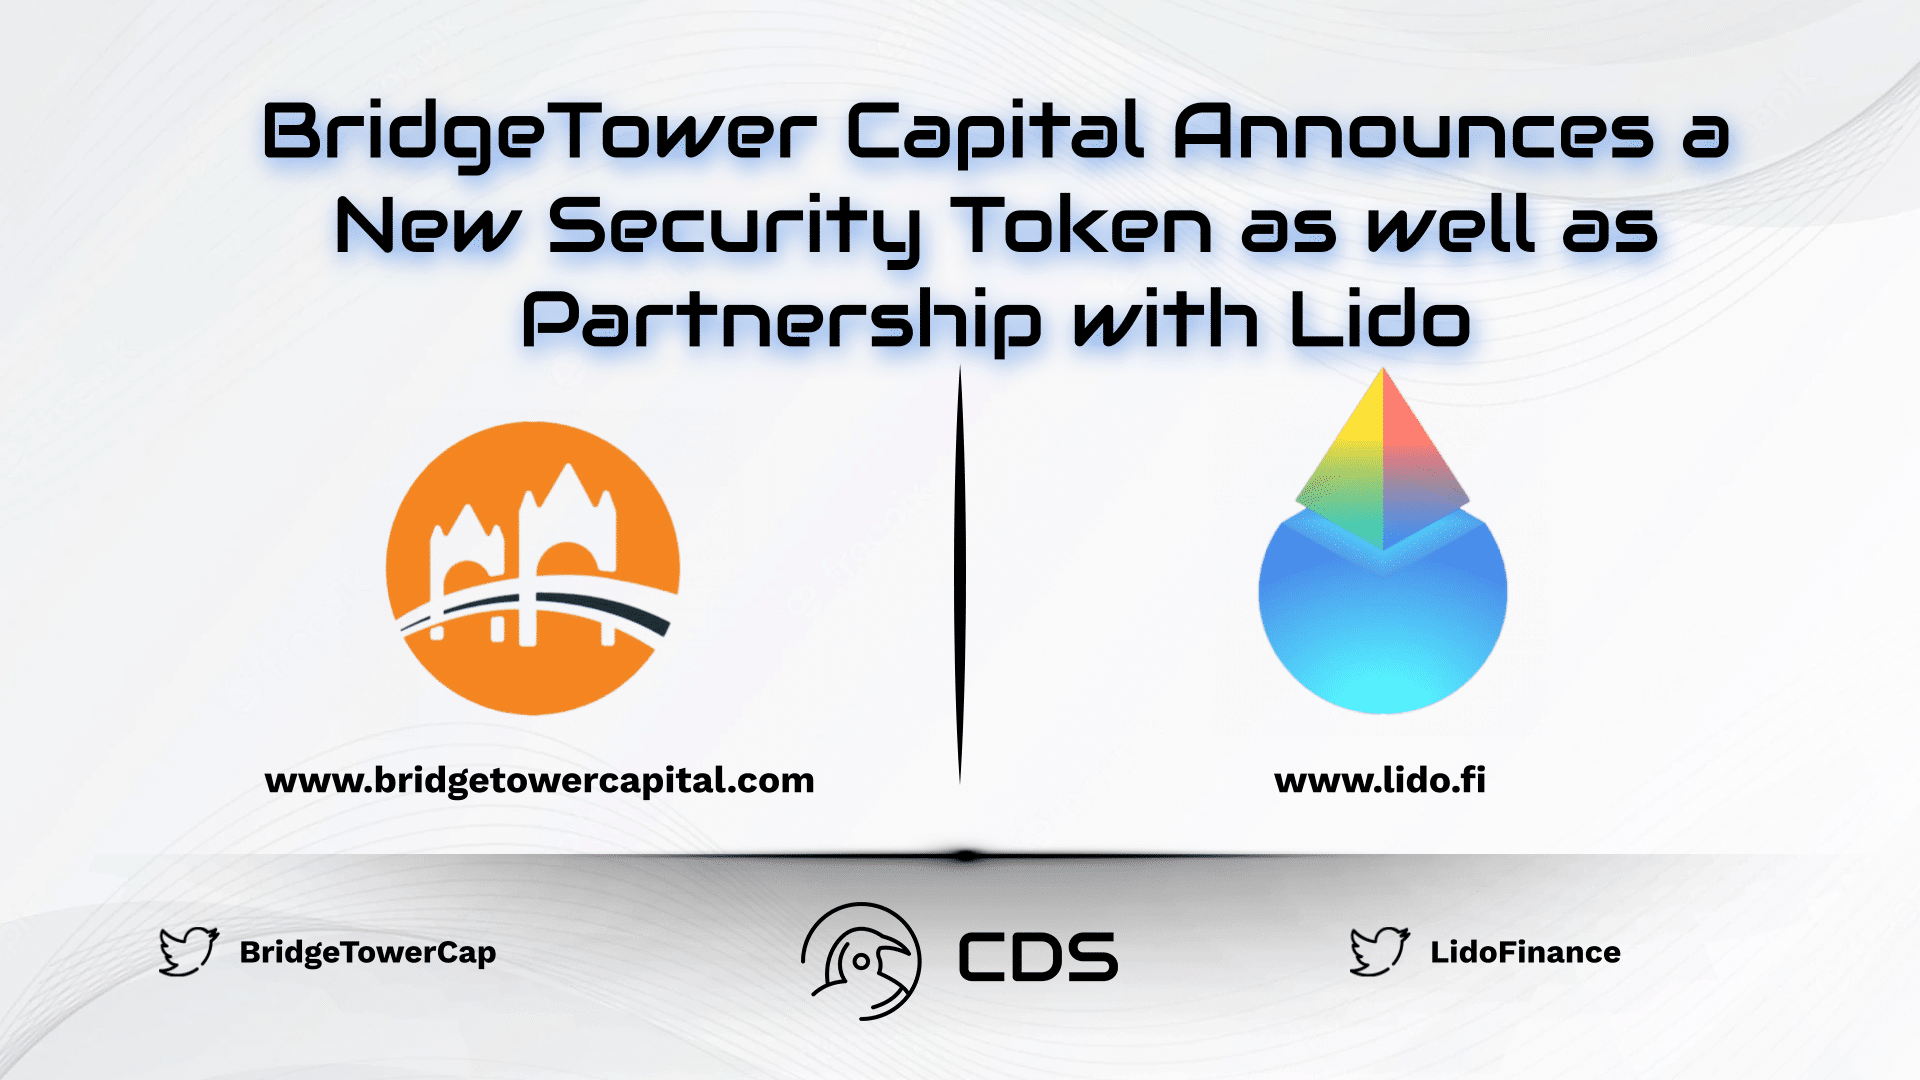 BridgeTower Capital Announces a New Security Token as well as Partnership with Lido